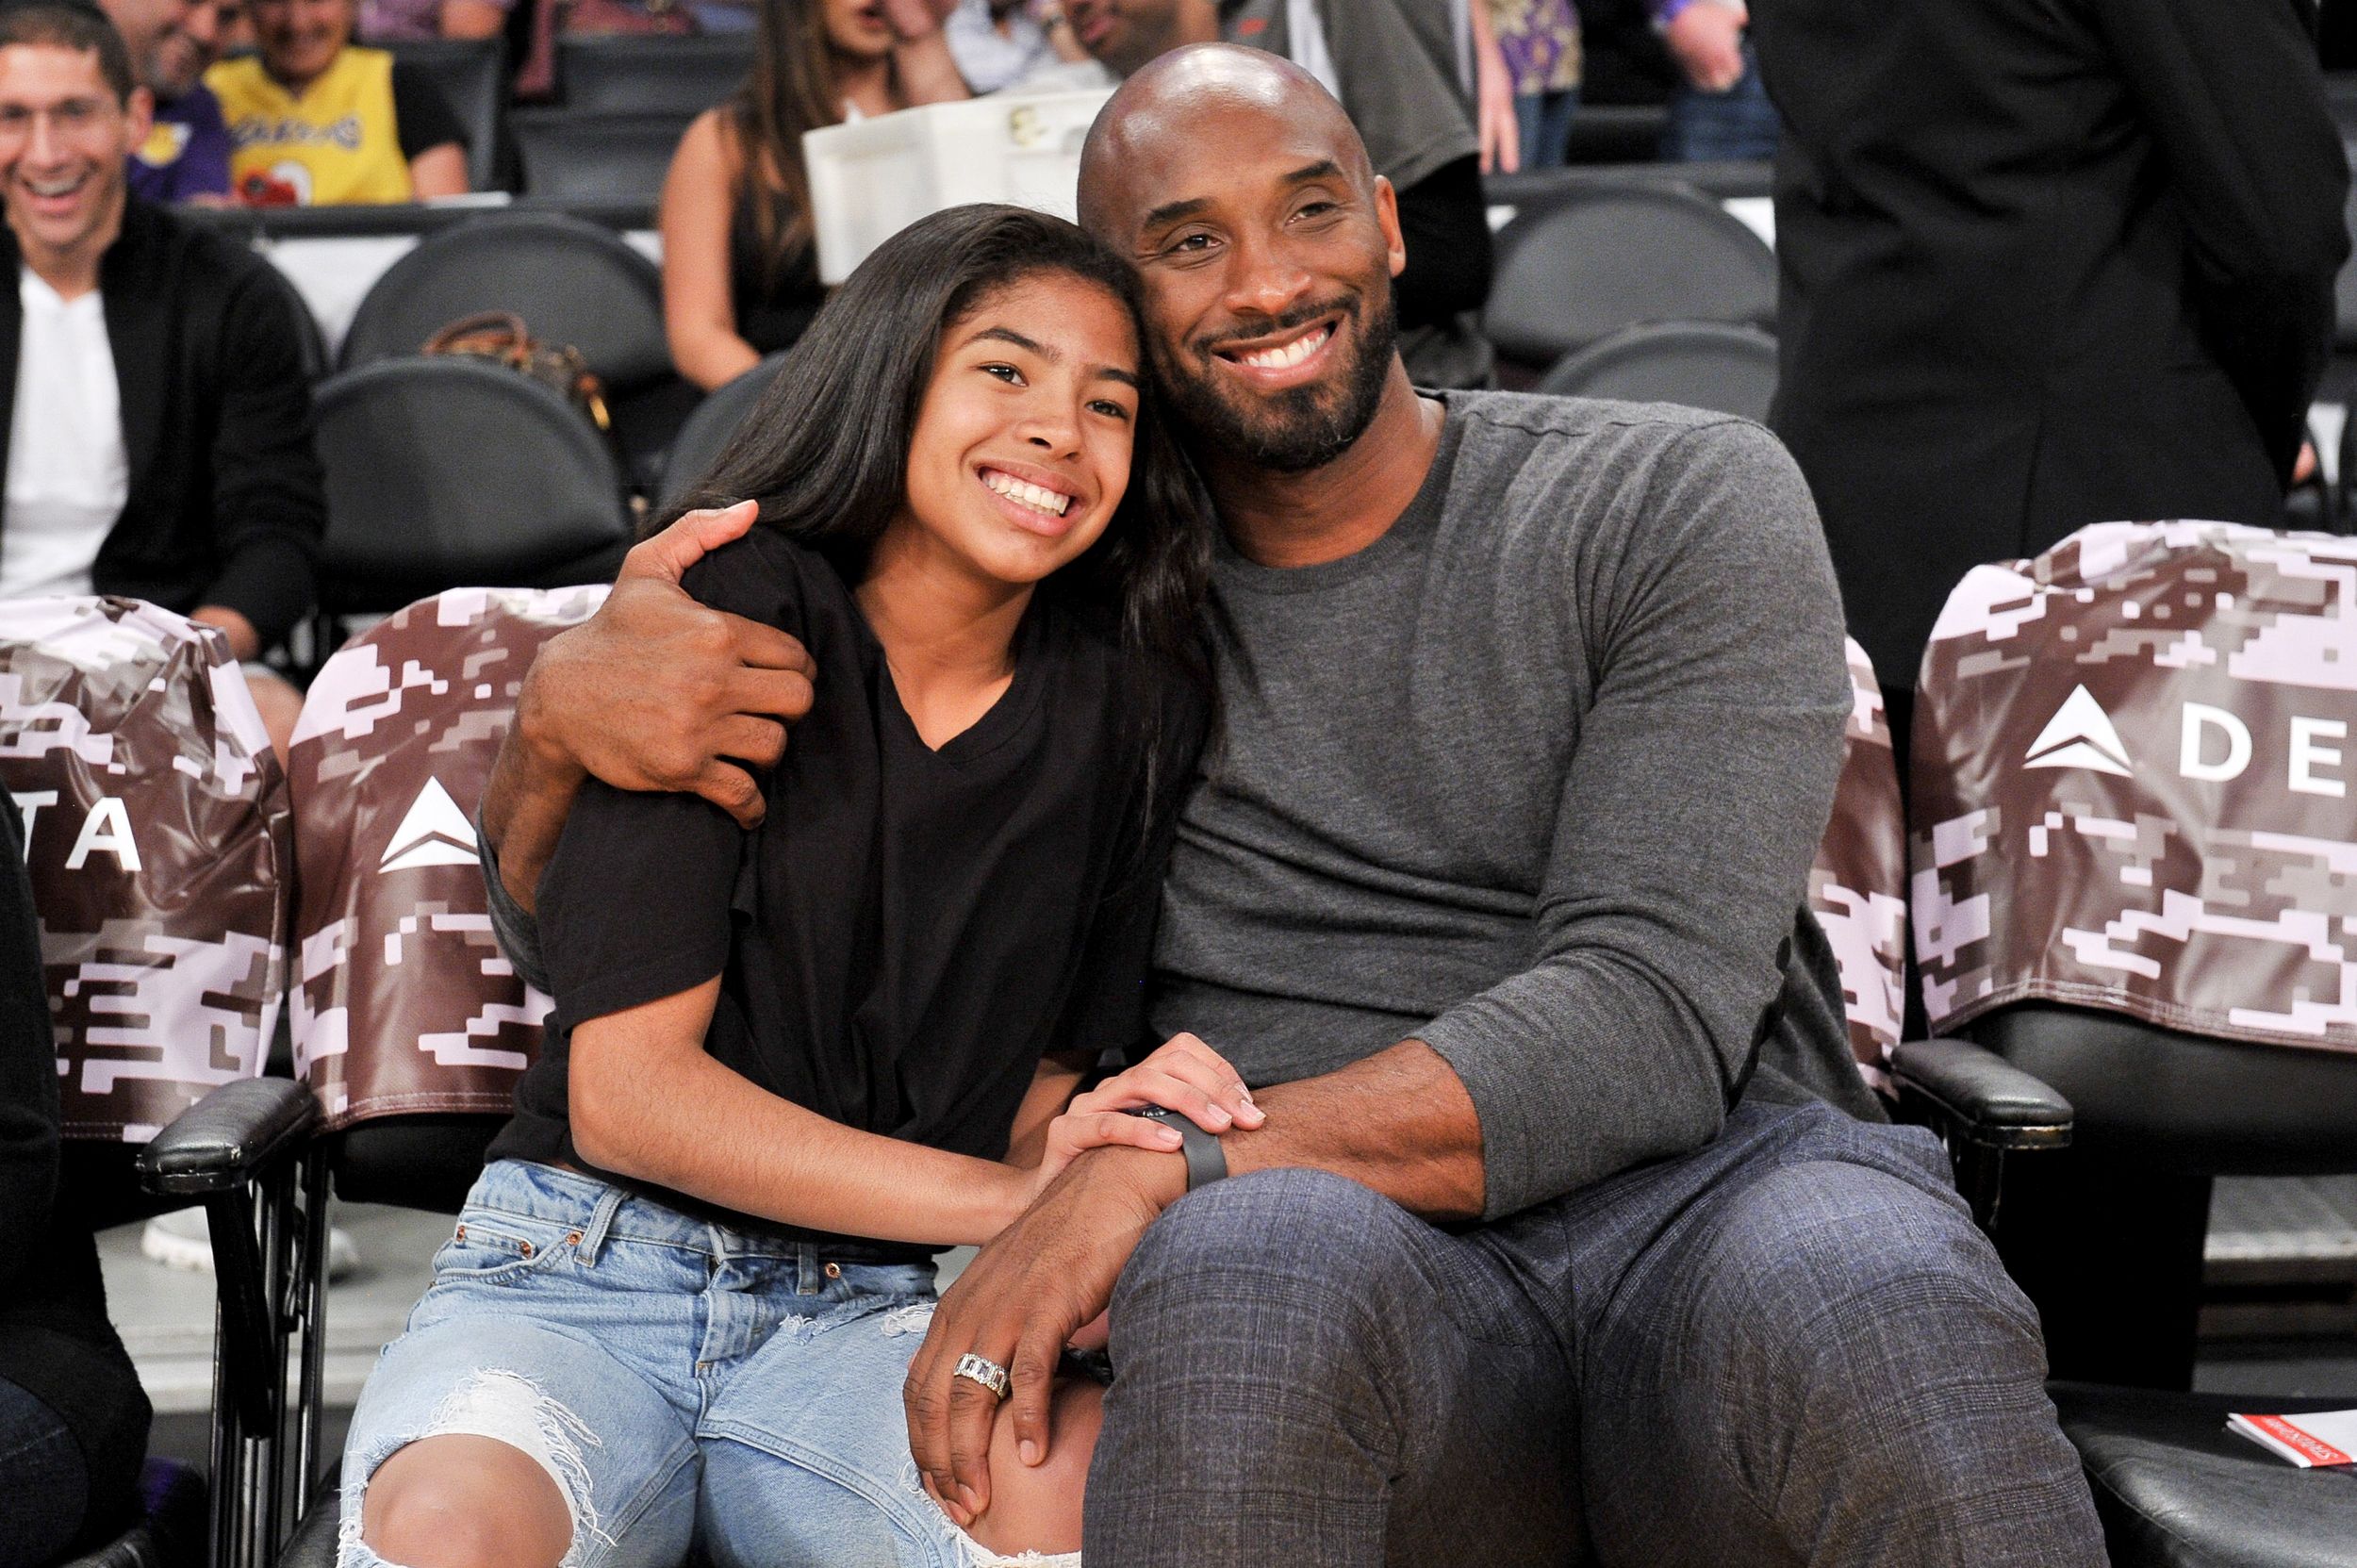 Vanessa Bryant changes Instagram profile picture to image of Kobe